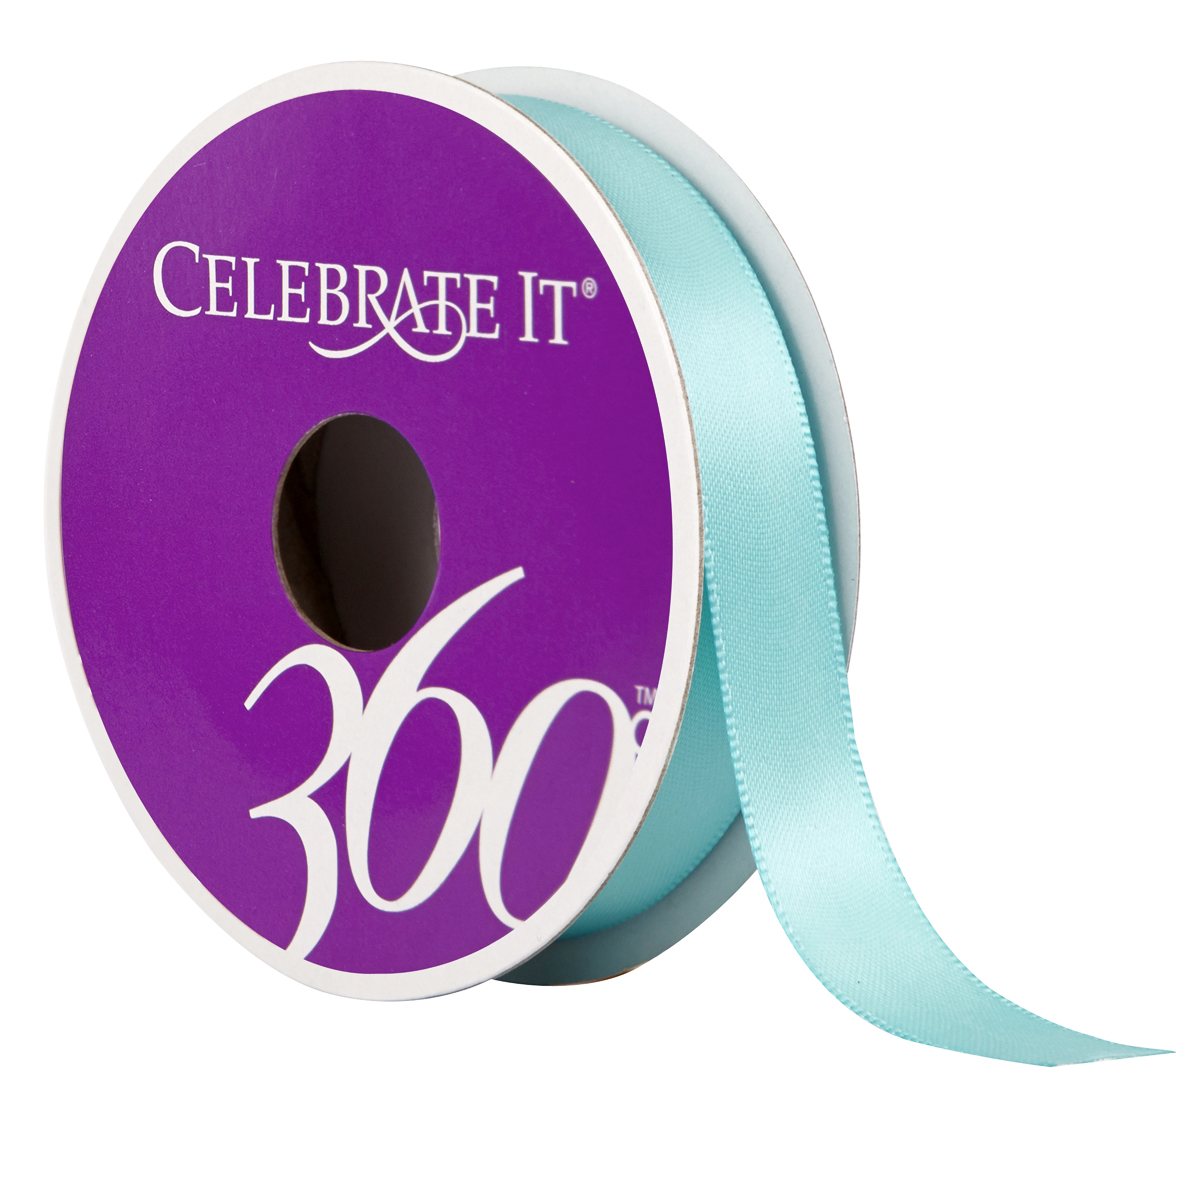 Celebrate It 360 Double-Faced Satin Ribbon, 5/8", Teal